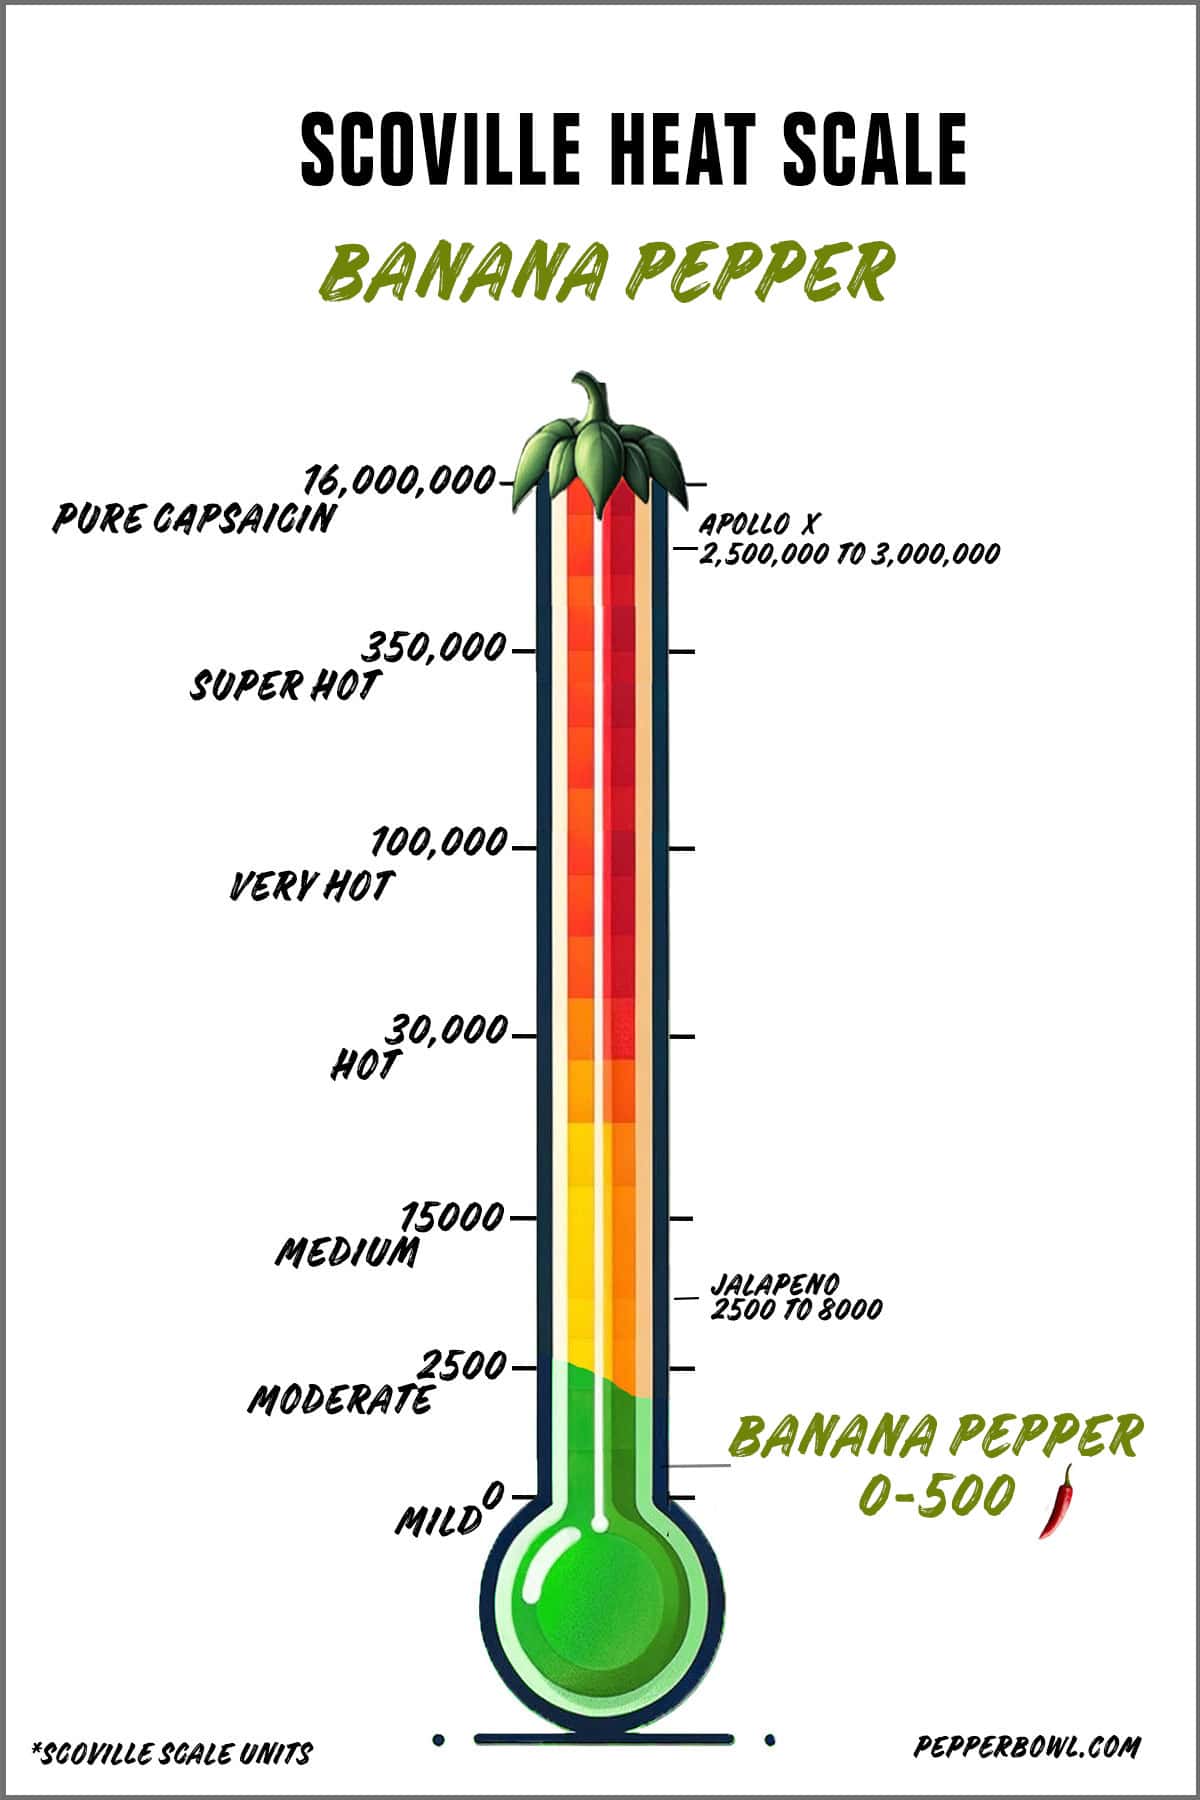 Illustration of the banana pepper in the Scoville scale, representing its moderate level of heat intensity.